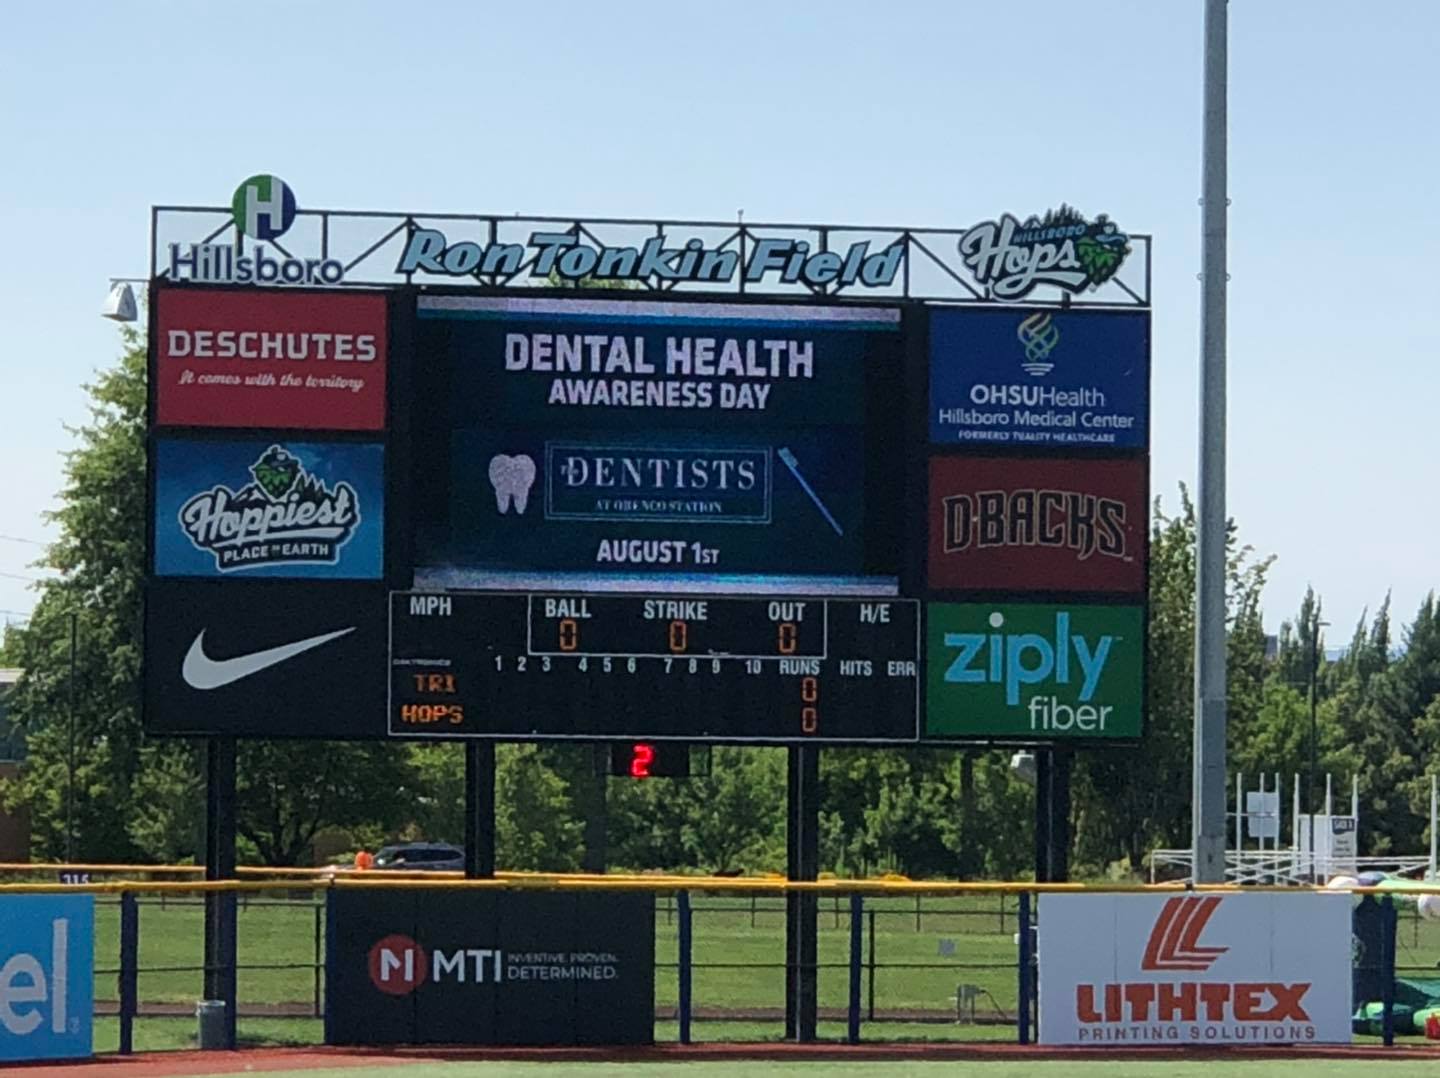 Baseball jumbo tron showing message from The Dentists at Orenco Station that reads Dental Health Awareness Day August 1